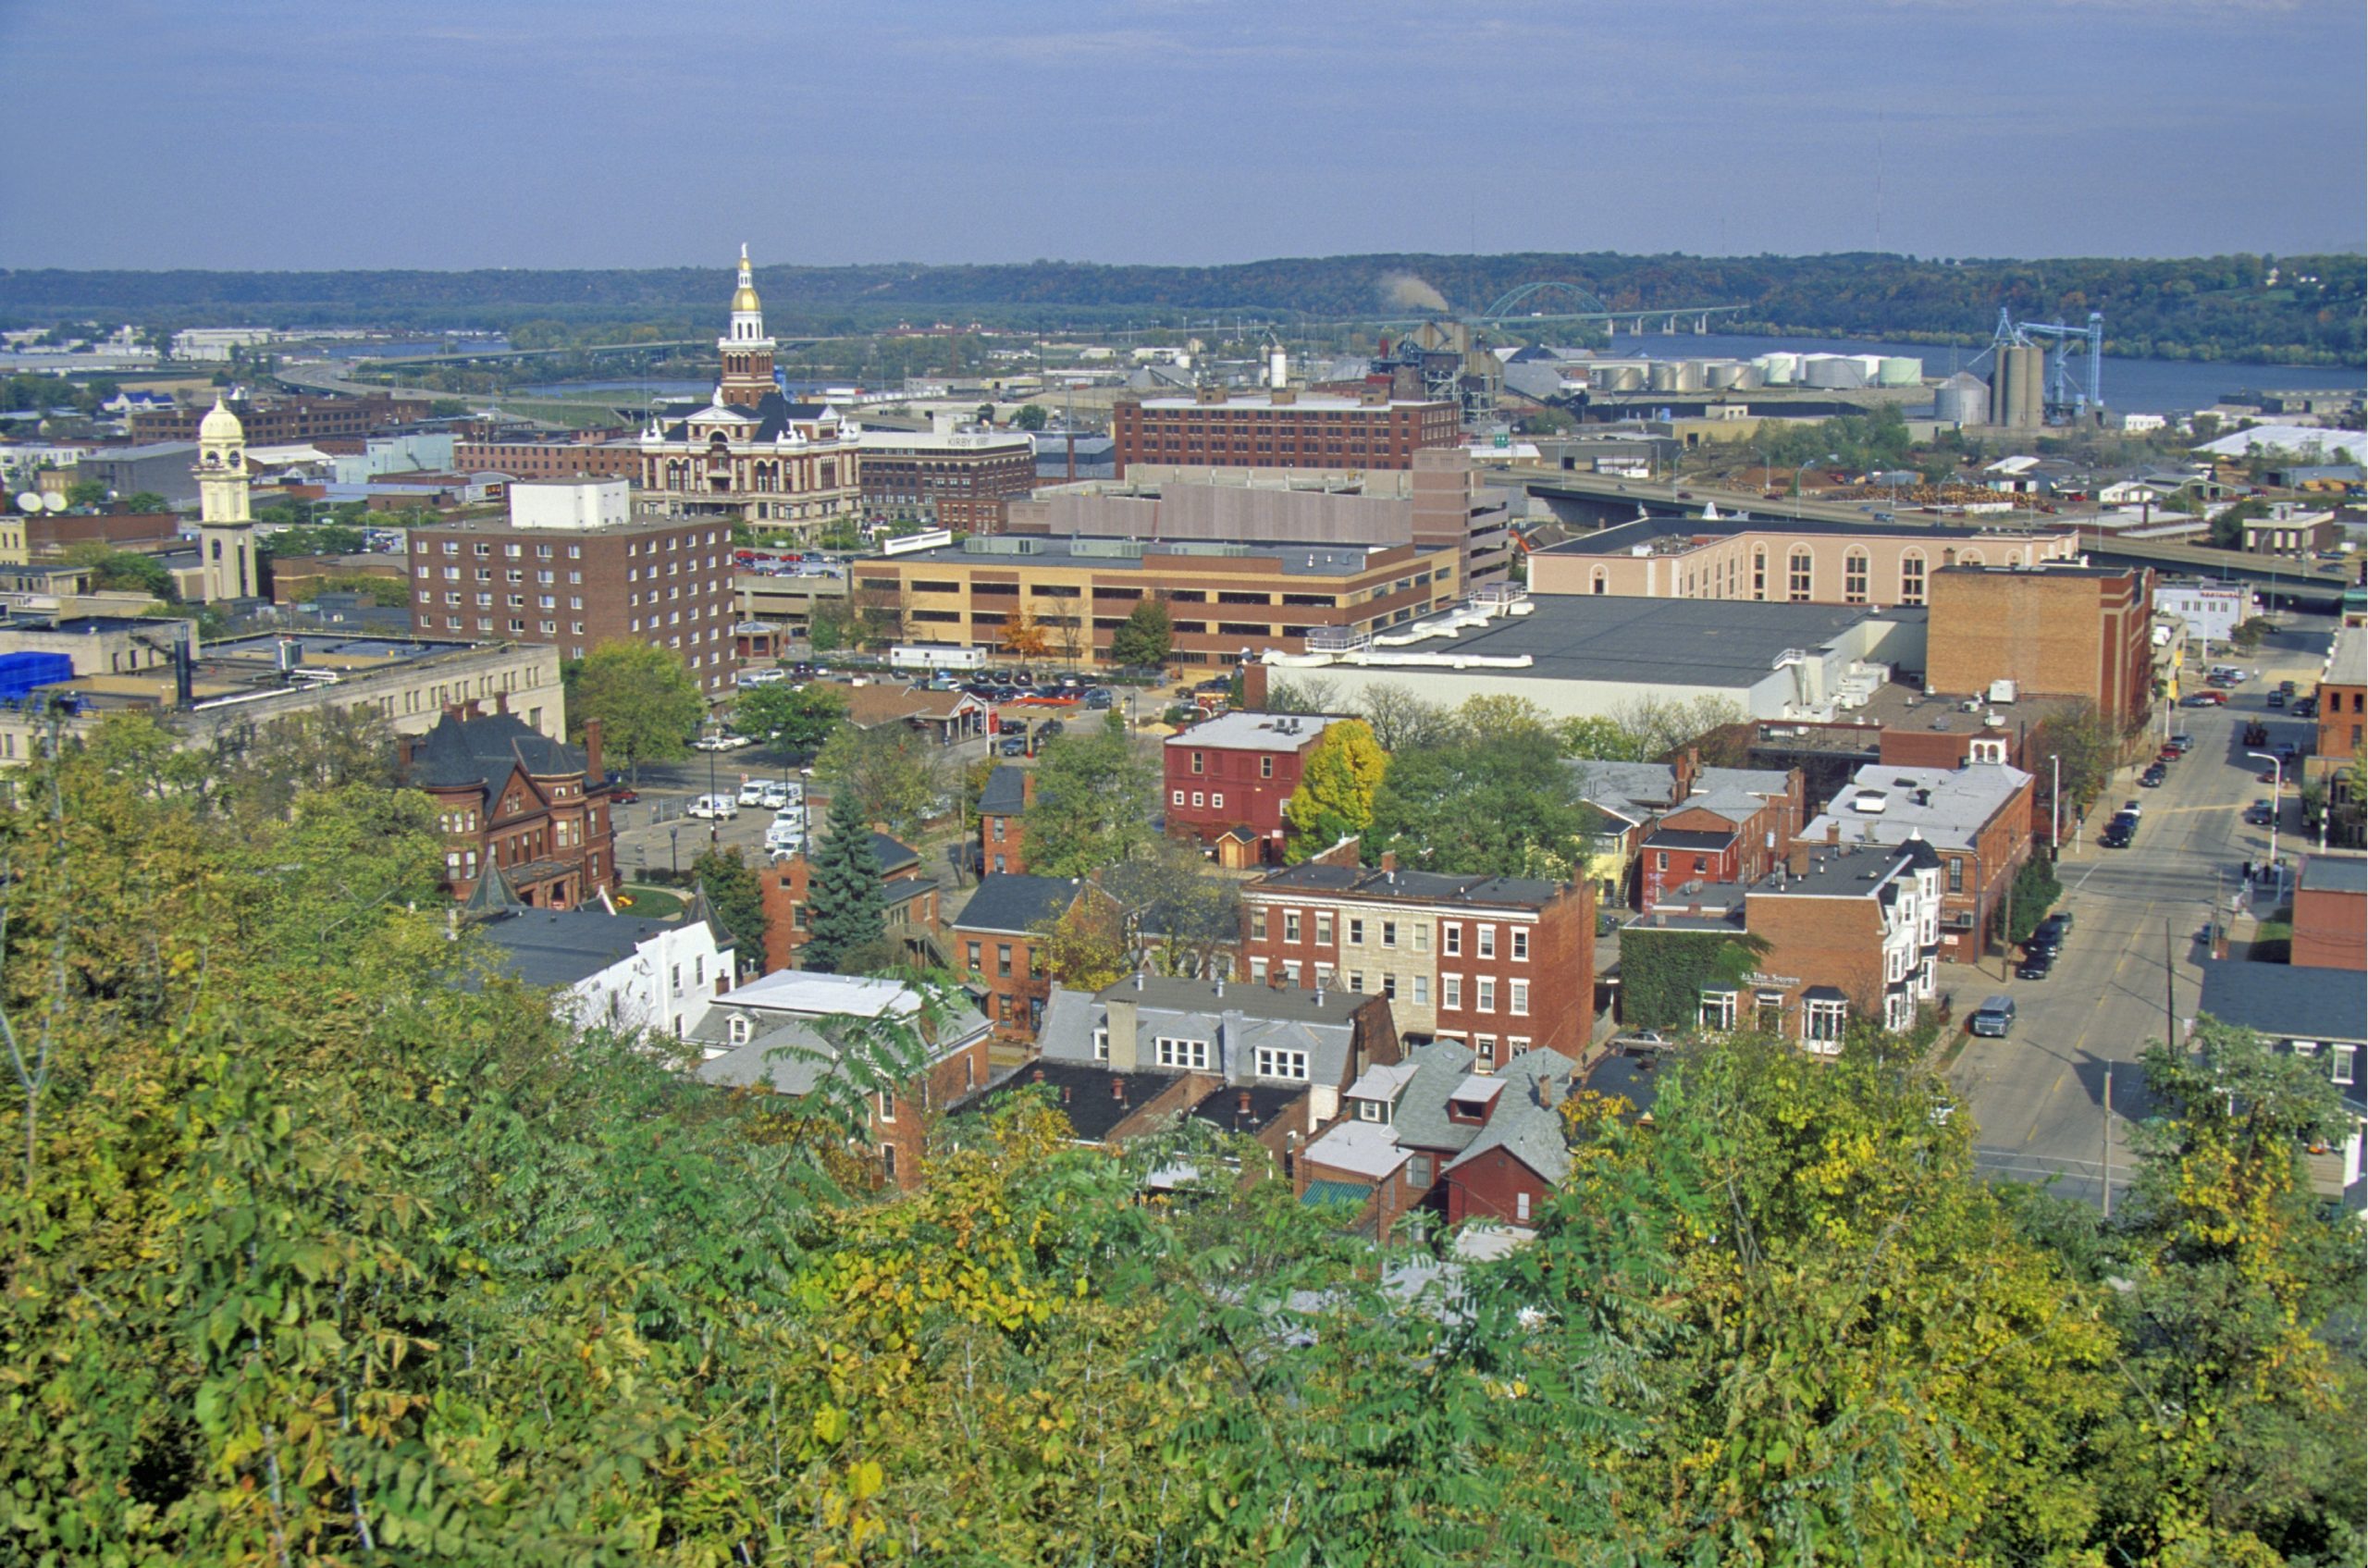 The Best Amazing Things to Do in Dubuque Iowa, New York